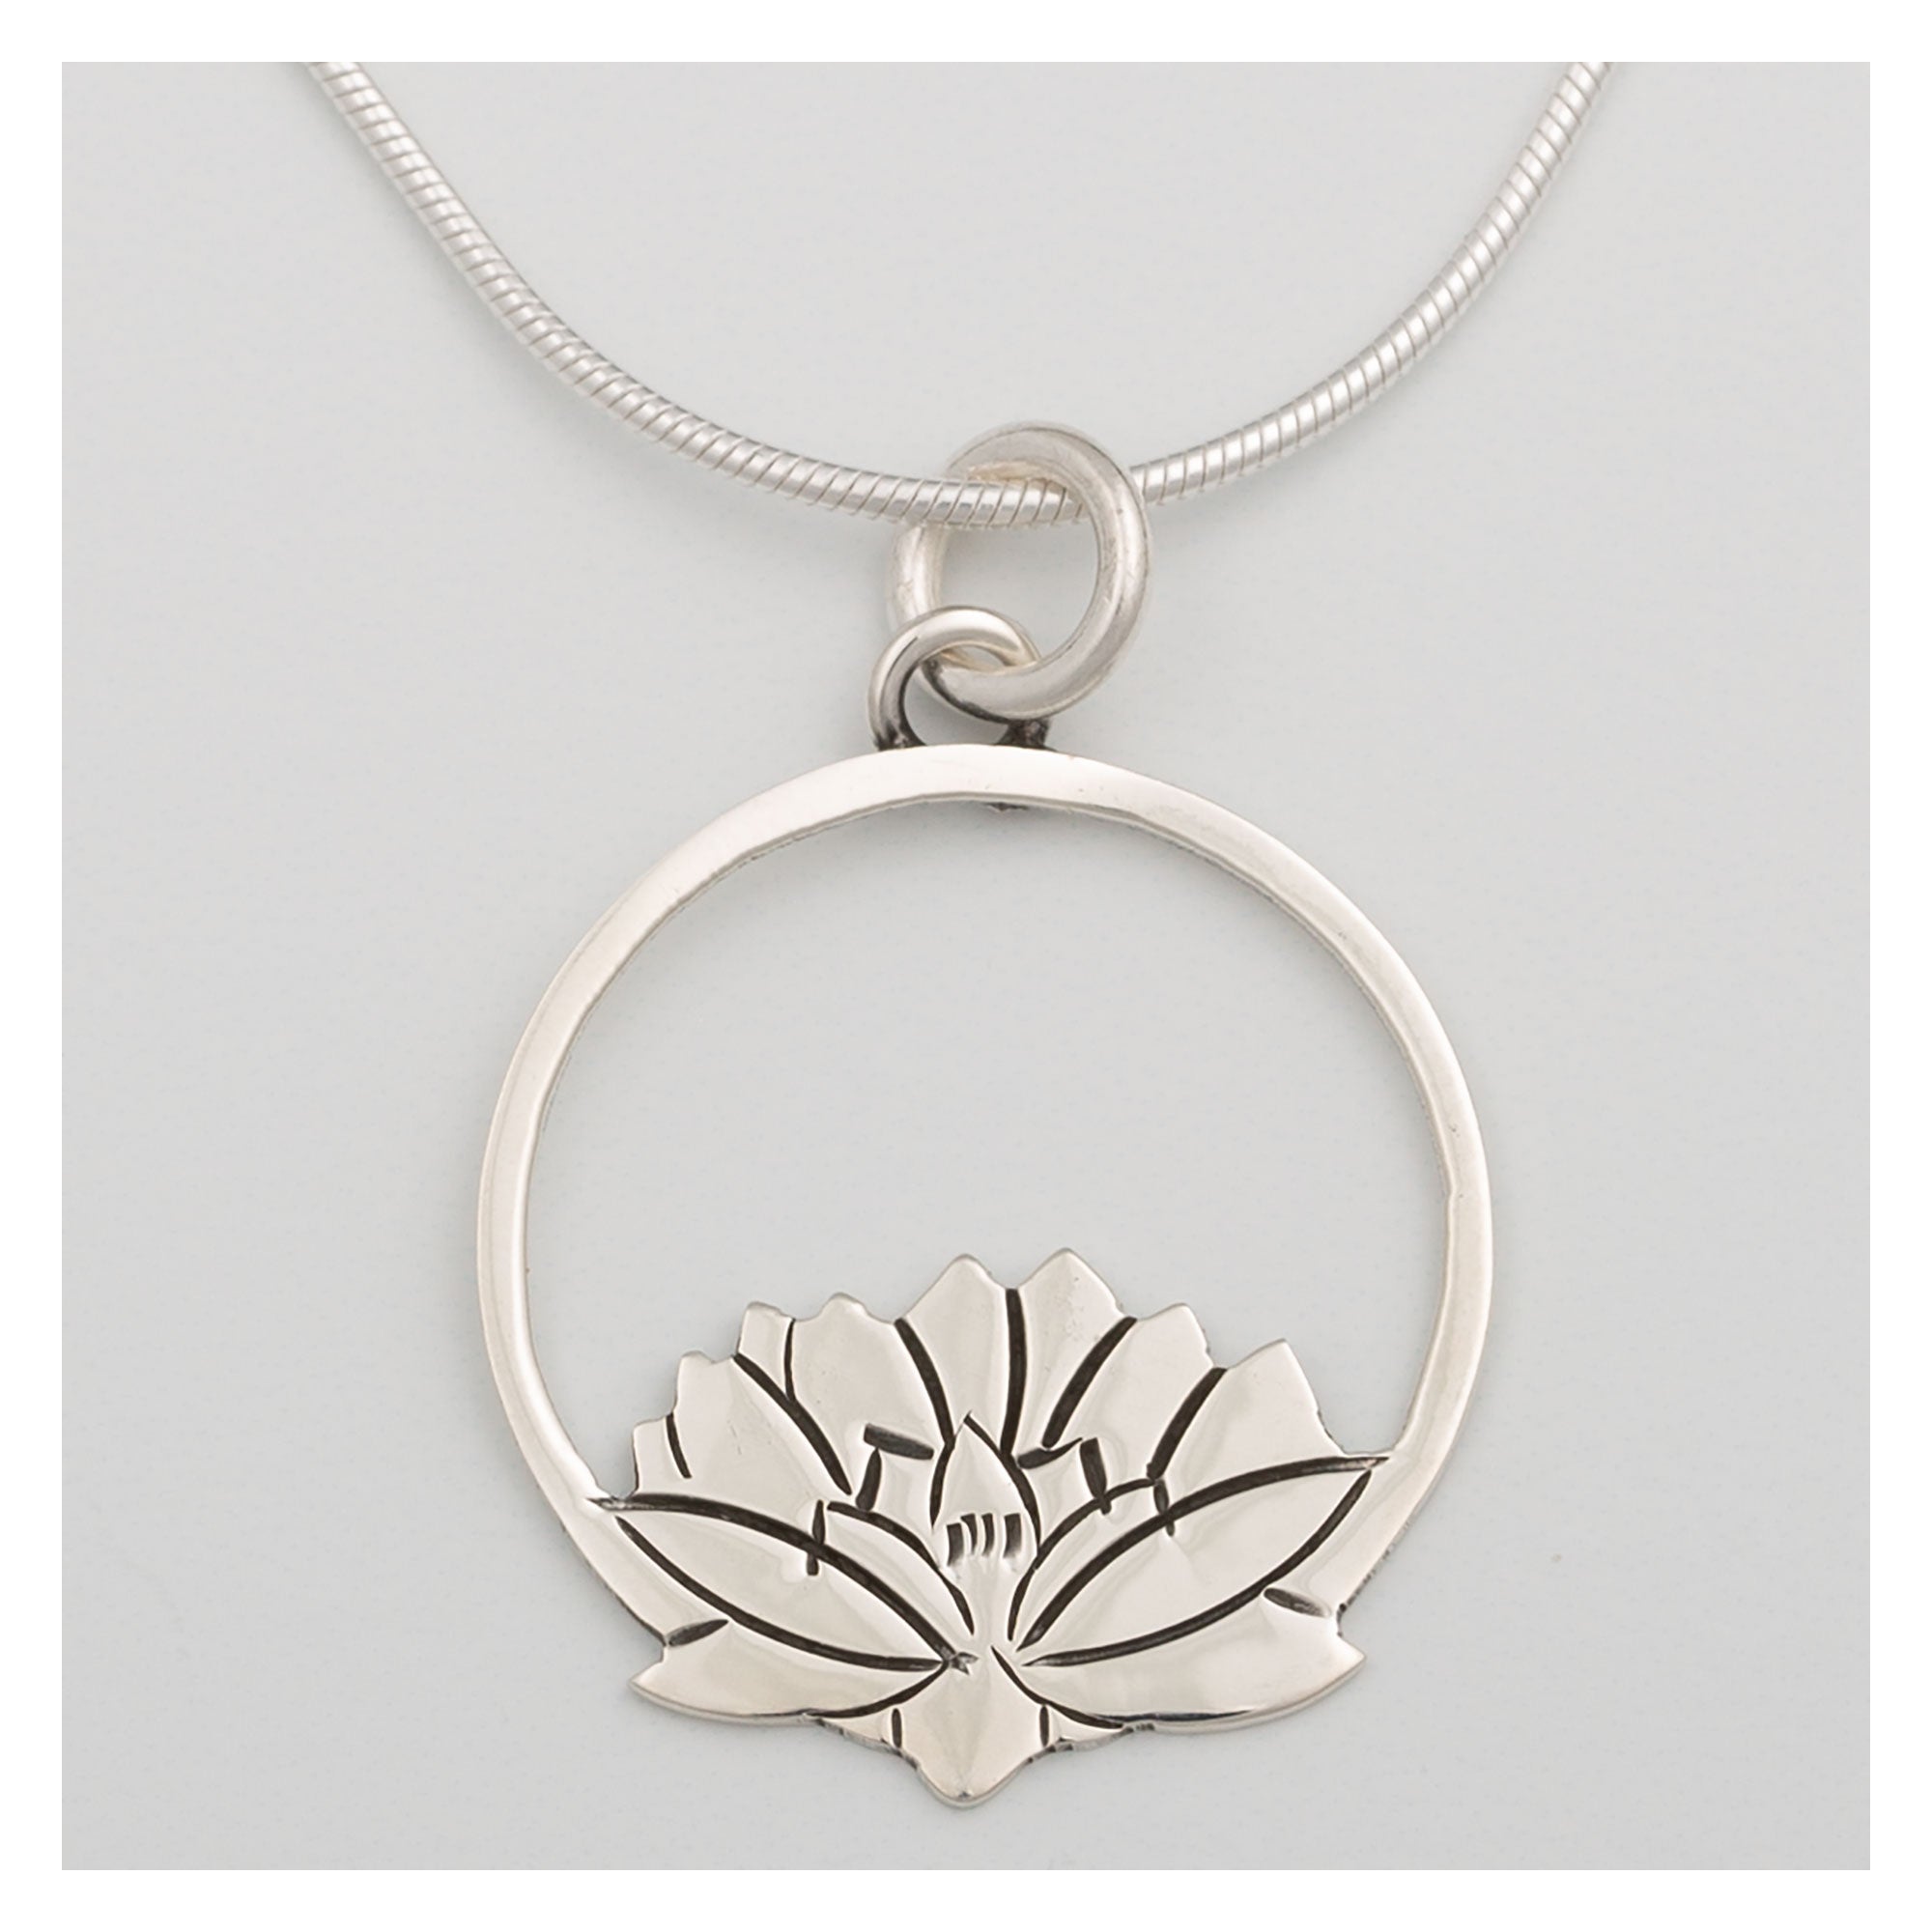 Blooming Flowers Sterling Necklace - Water Lily - With Sterling Cable Chain